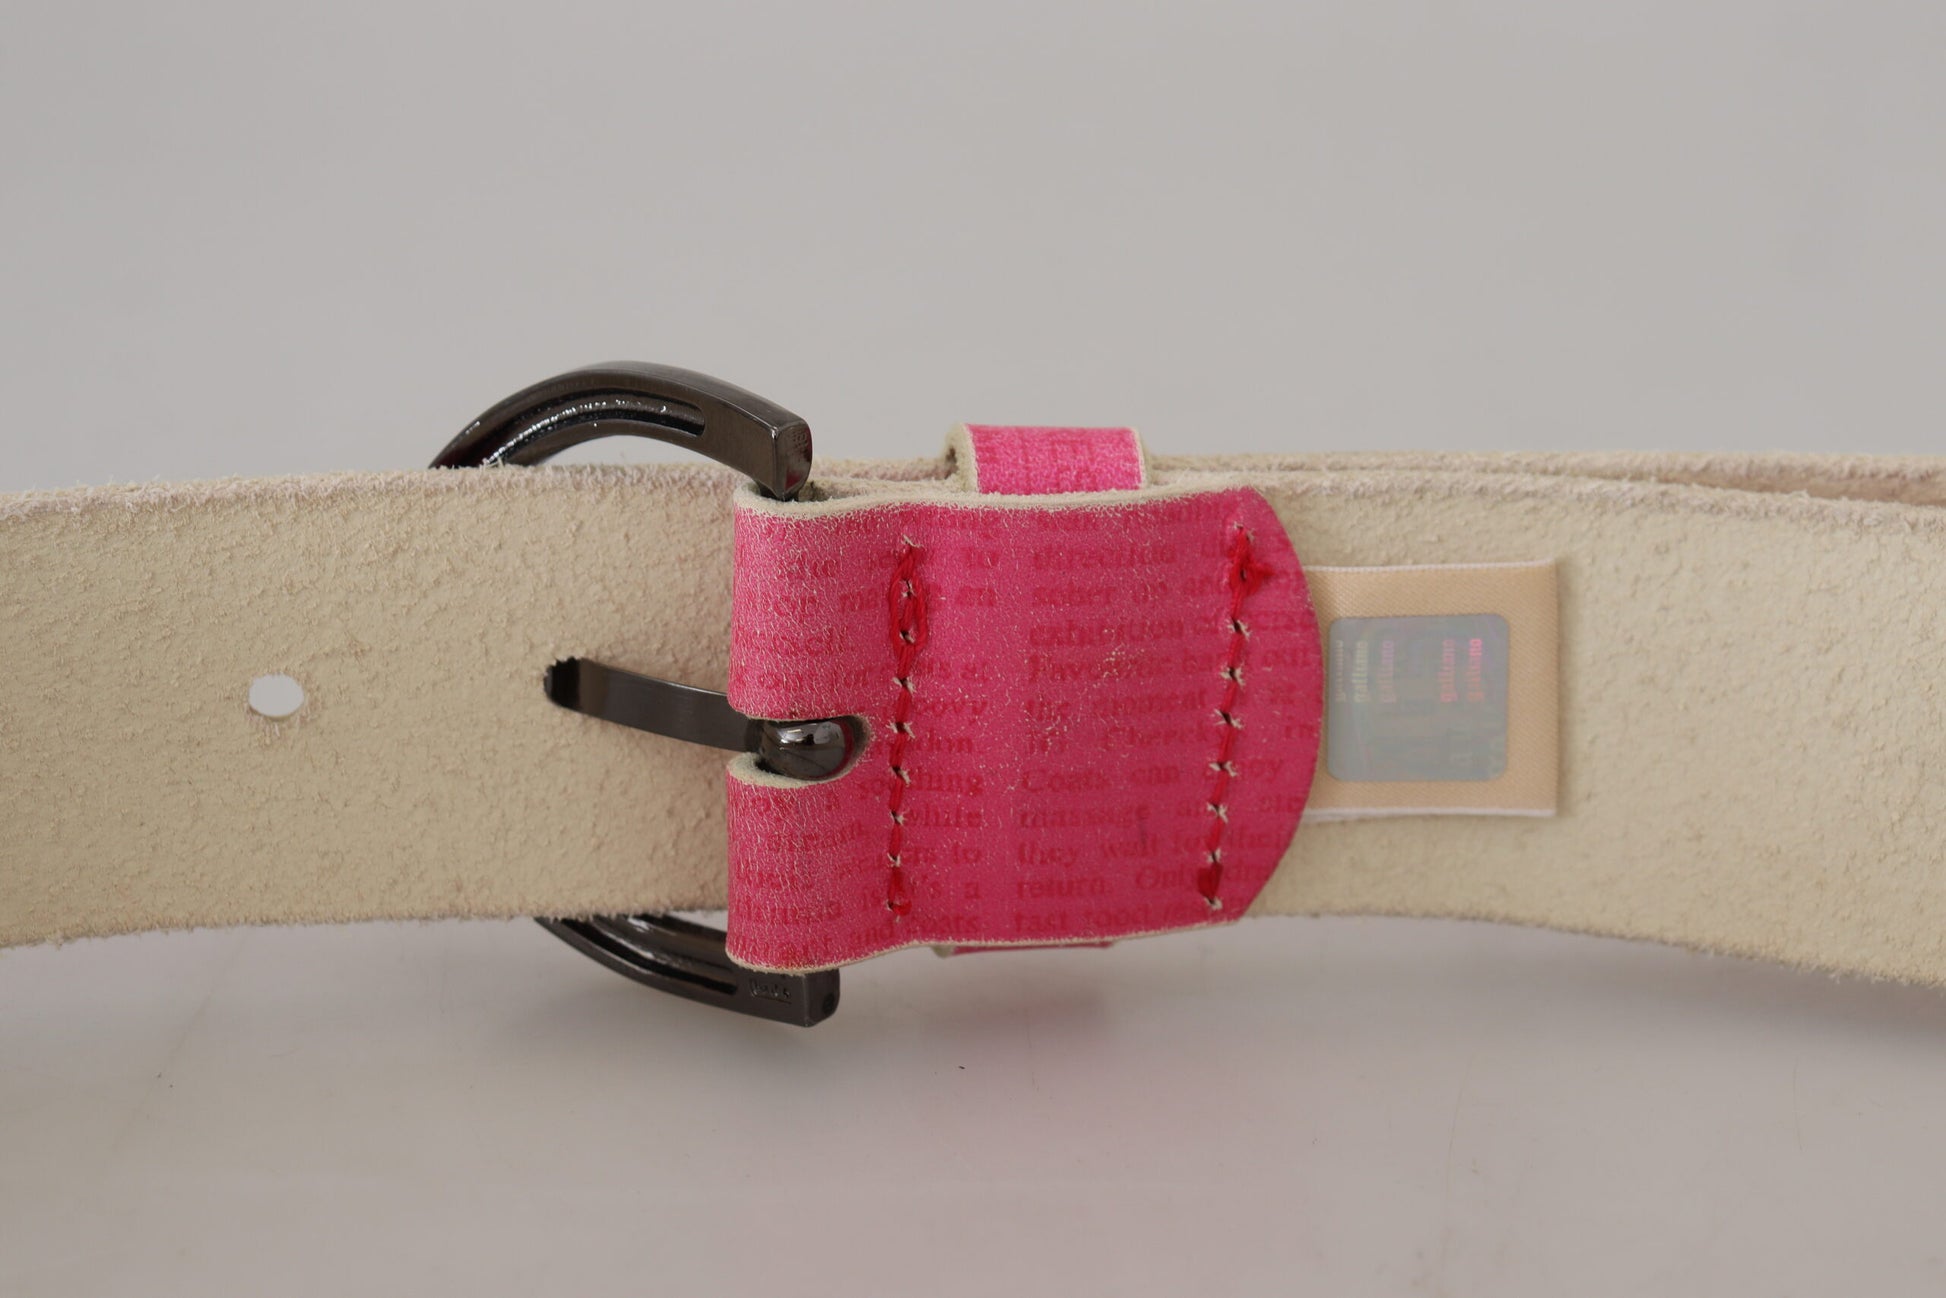 John Galliano Pink Leather Letter Logo Round Buckle Waist Belt - Designed by John Galliano Available to Buy at a Discounted Price on Moon Behind The Hill Online Designer Discount Store